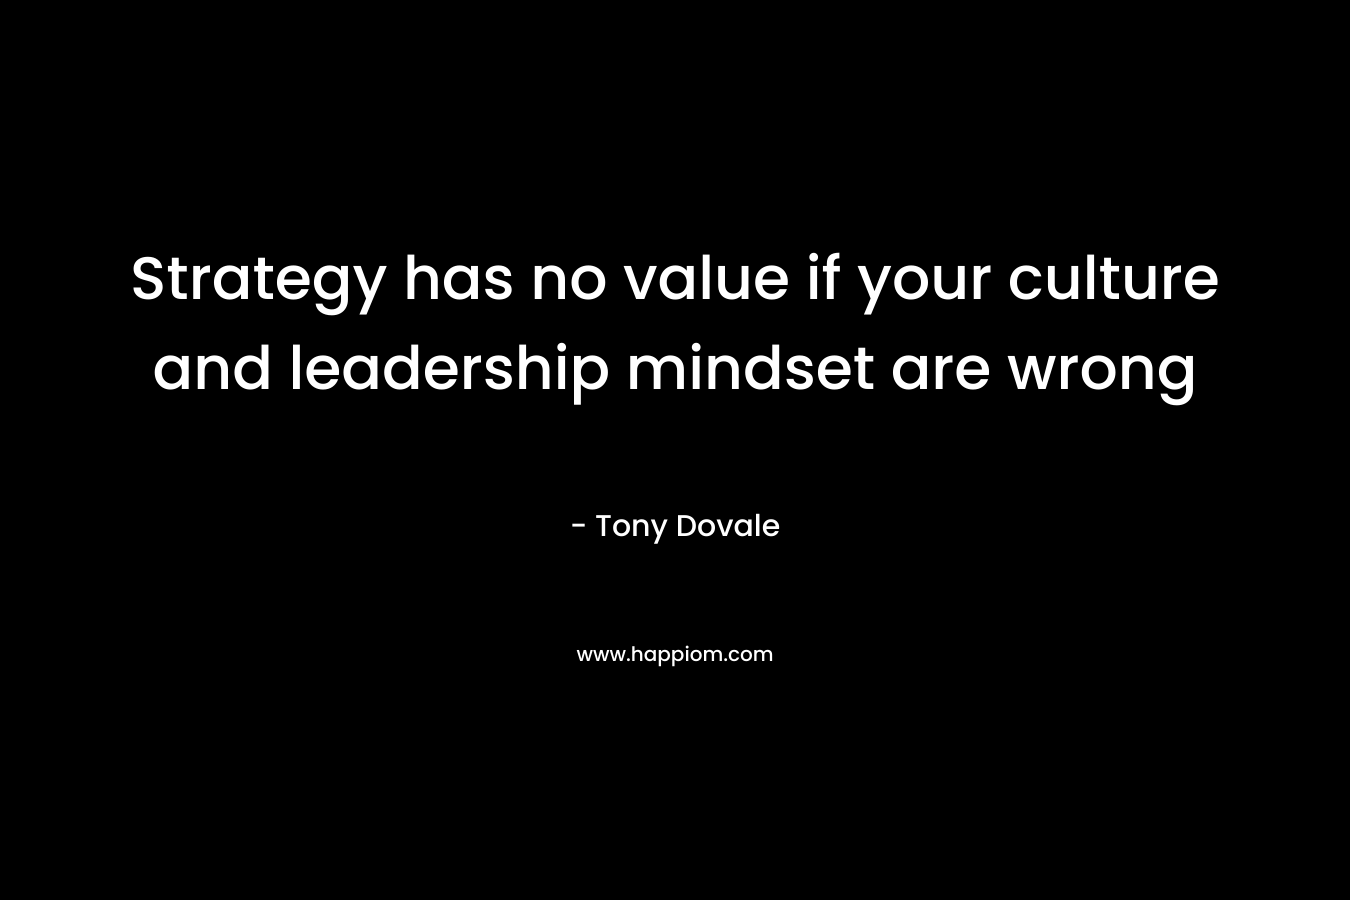 Strategy has no value if your culture and leadership mindset are wrong